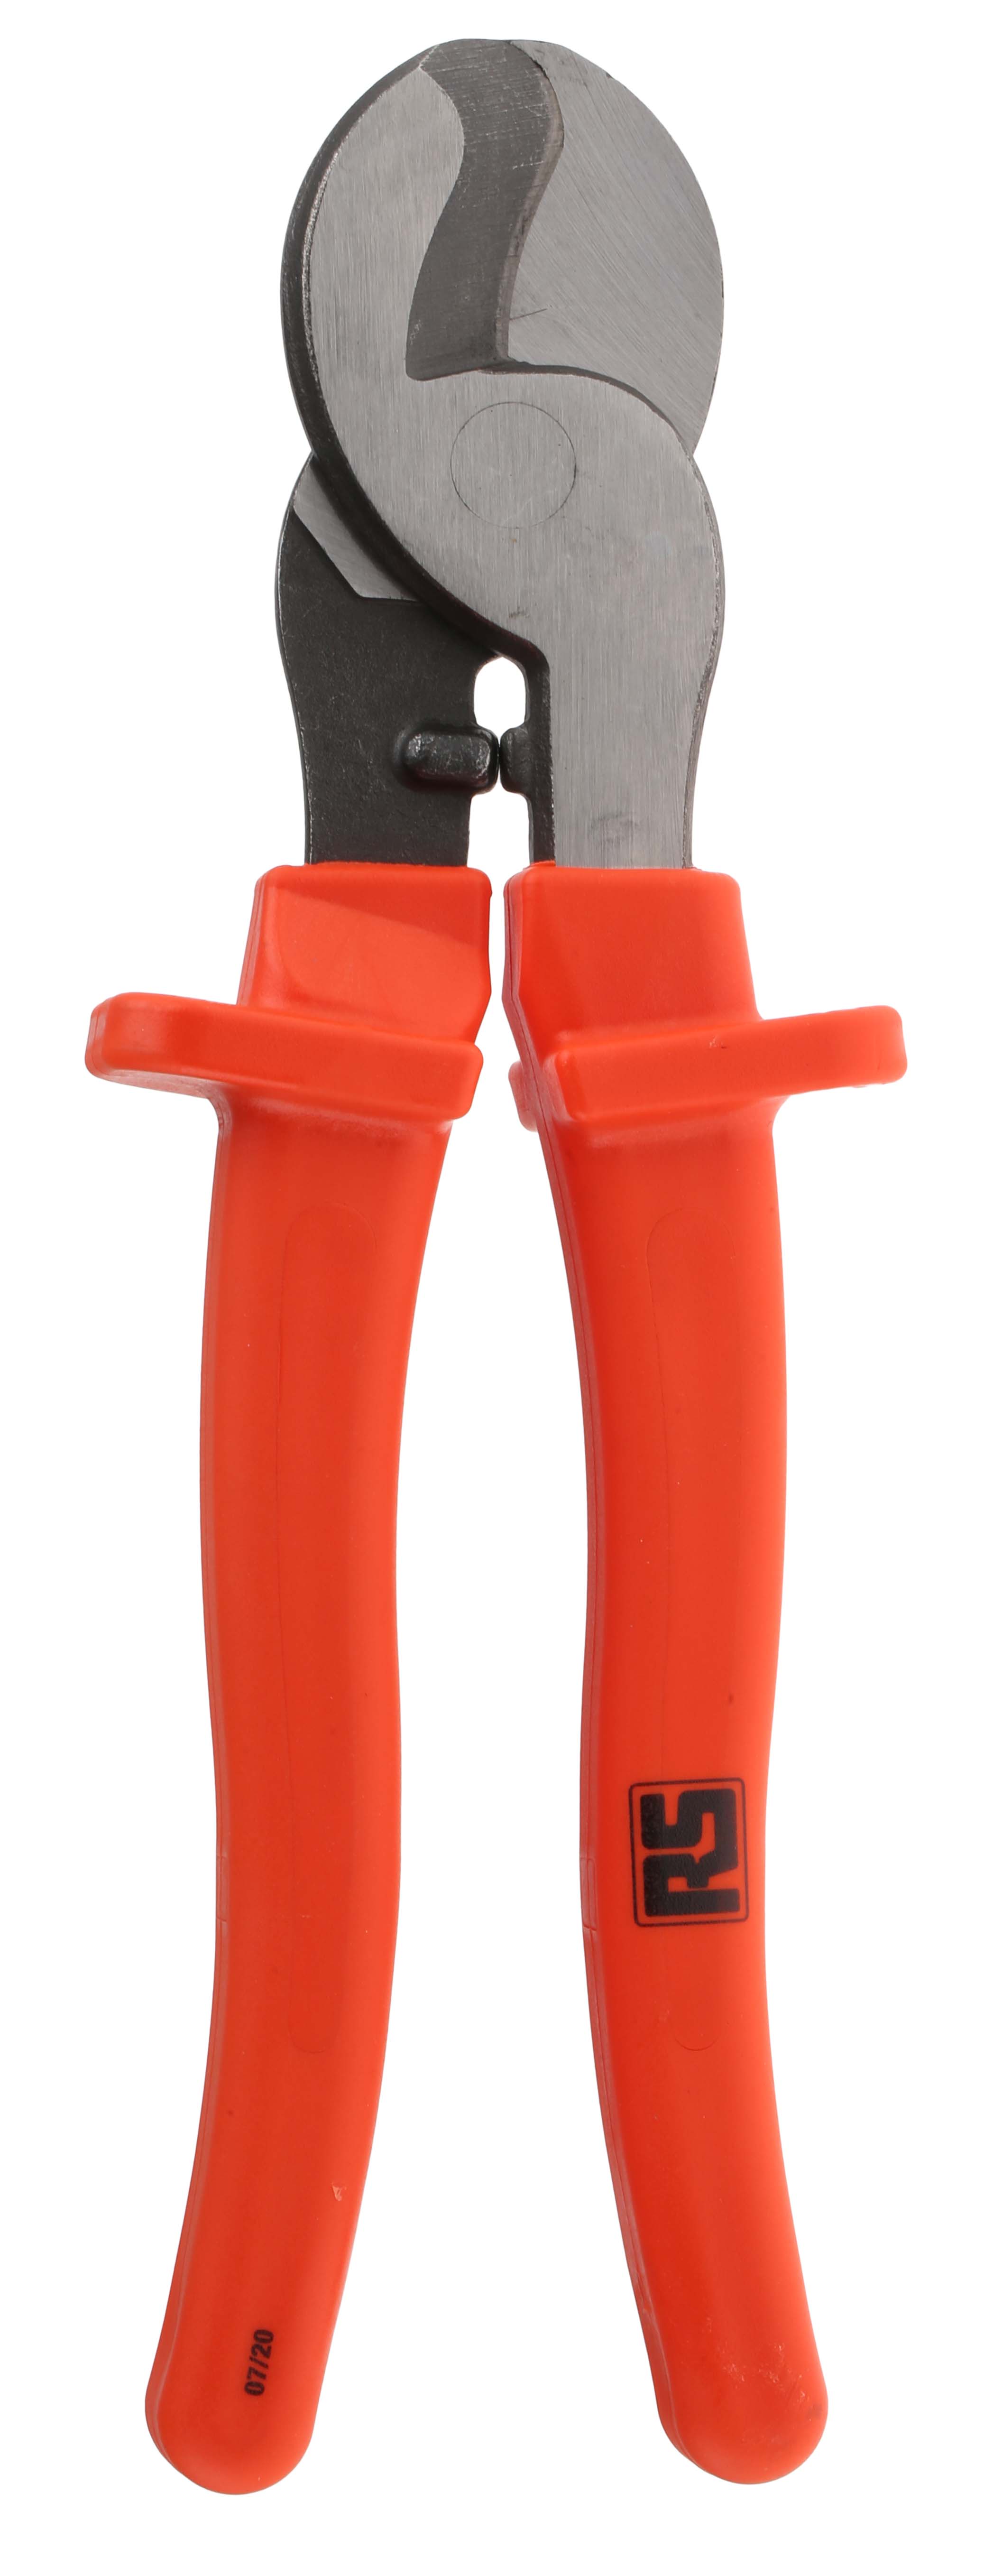 ITL Insulated Tools Ltd 235 mm Cable Cutters